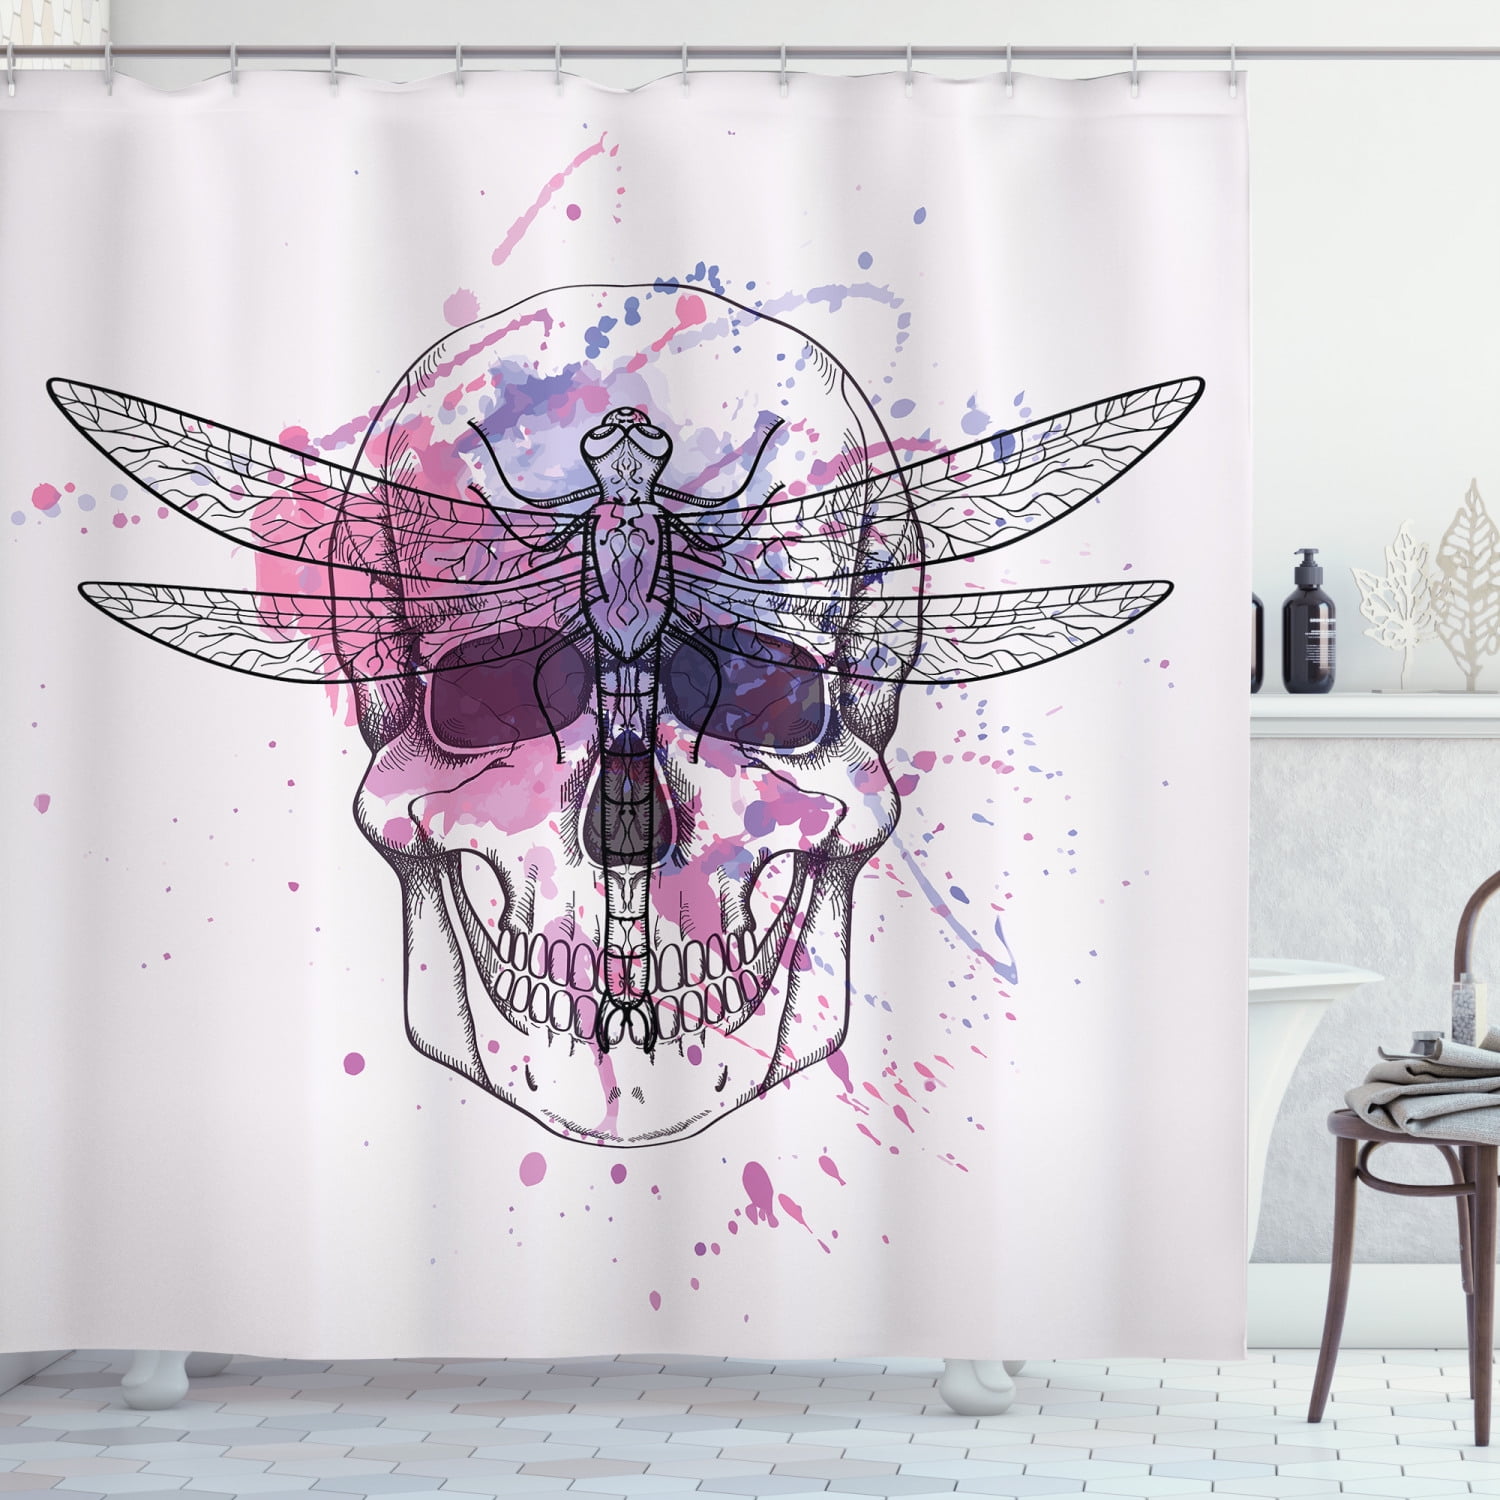 72" Shower Curtain Set Ancient Skull with Book Bathroom Polyester Fabric Hooks 